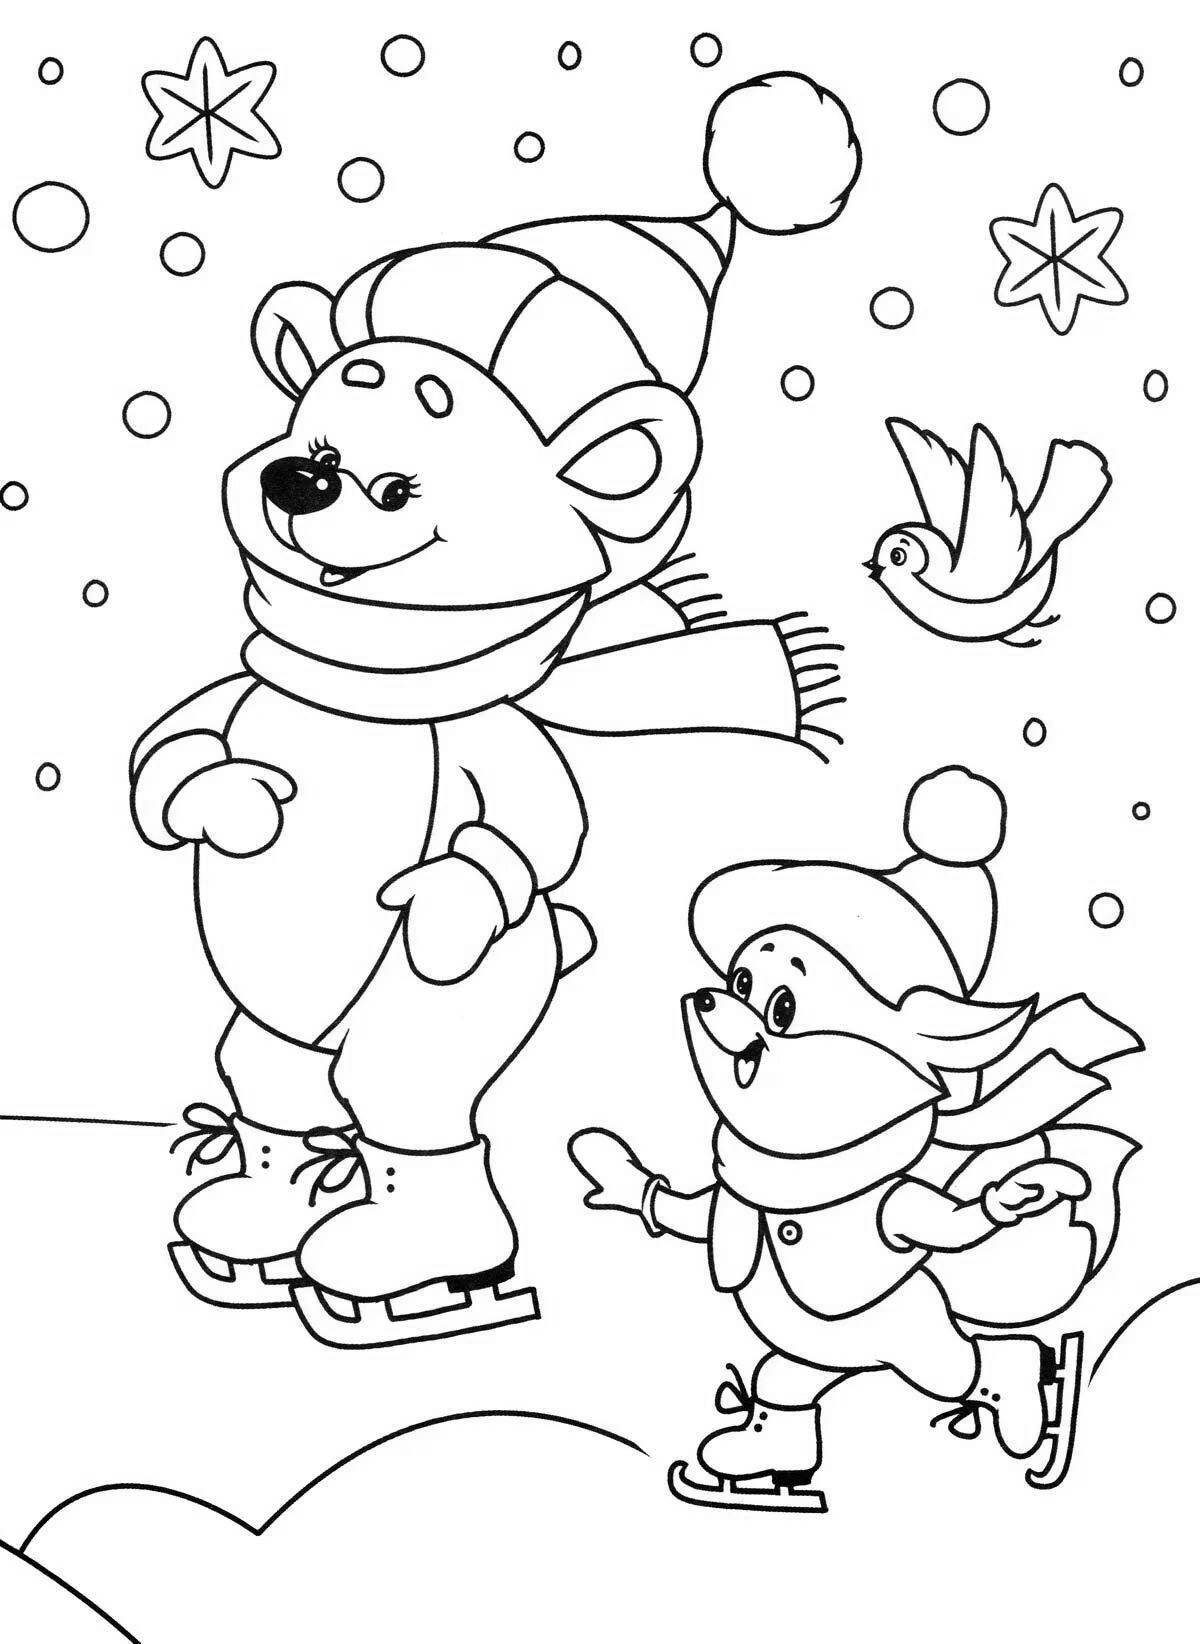 Glitter coloring book for children 6 years old winter